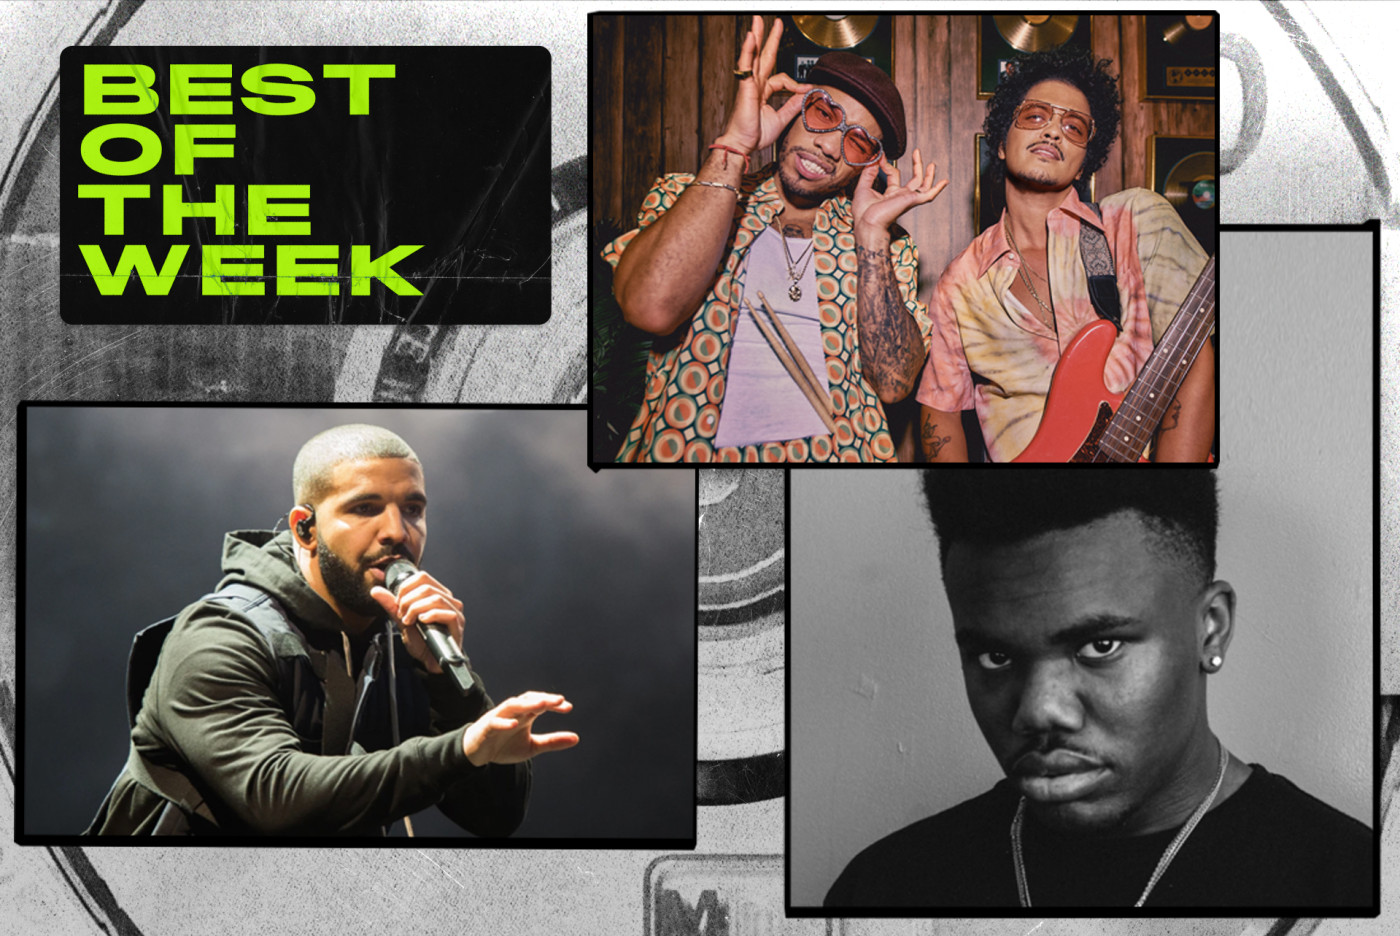 Best New Music This Week: Drake, Baby Keem, Bruno Mars, Anderson .Paak, and More